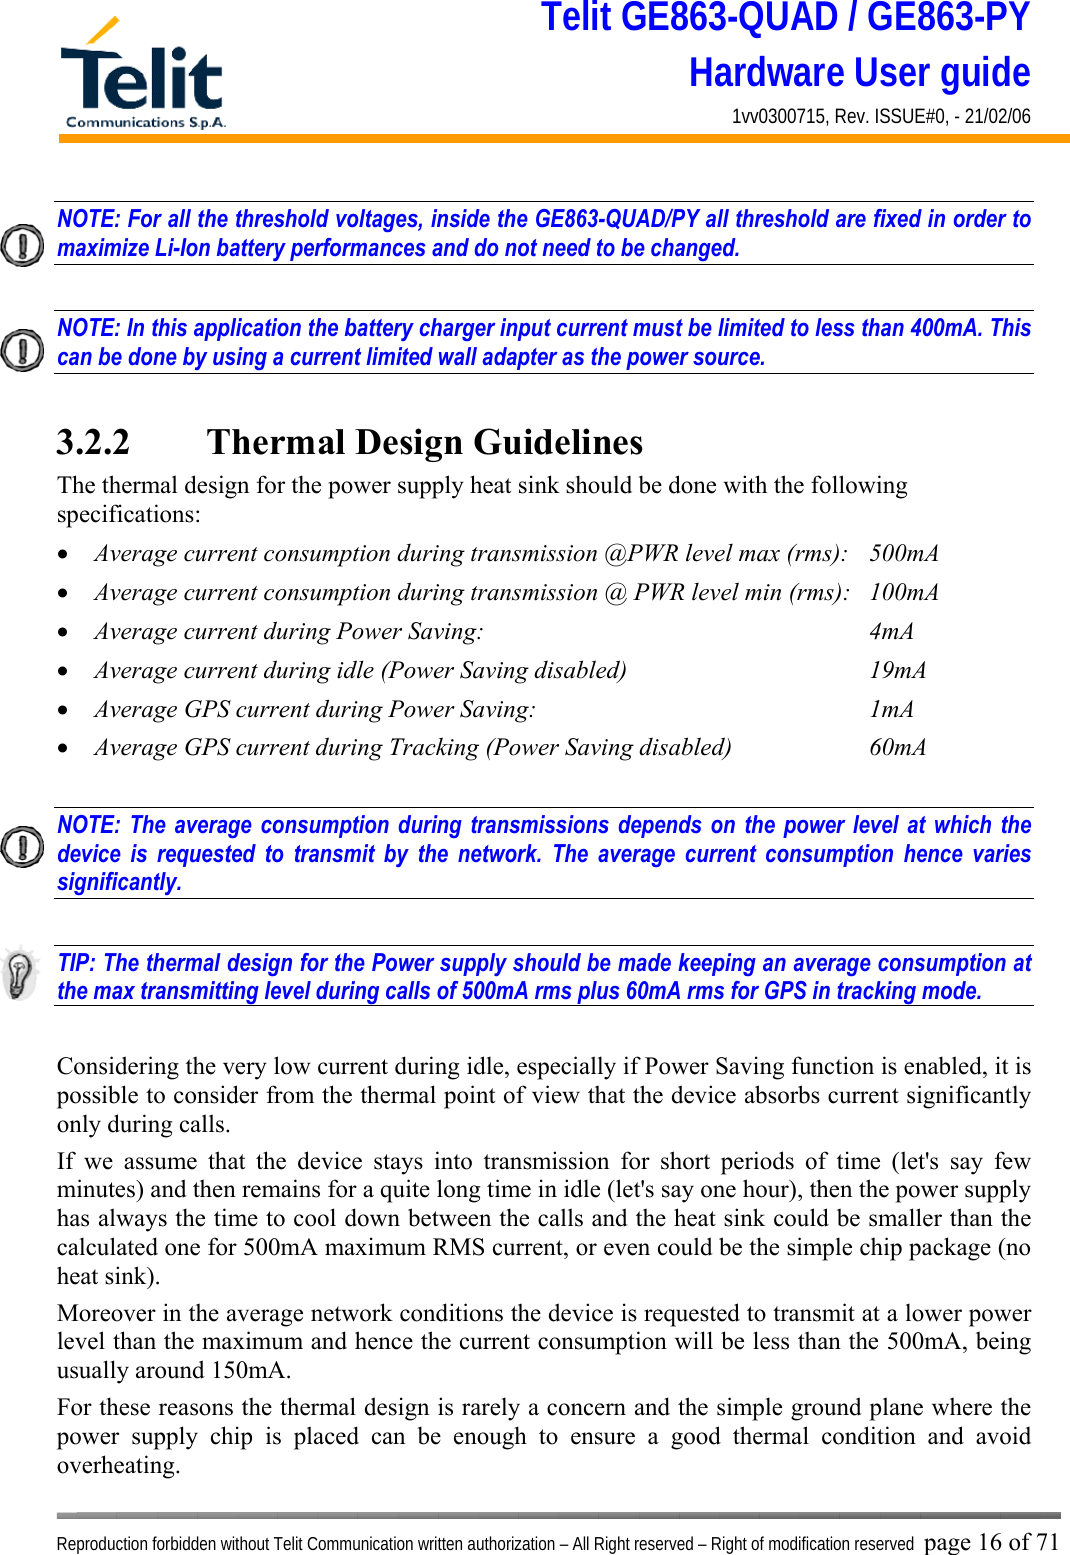 Telit GE863-QUAD / GE863-PY Hardware User guide 1vv0300715, Rev. ISSUE#0, - 21/02/06    Reproduction forbidden without Telit Communication written authorization – All Right reserved – Right of modification reserved page 16 of 71 NOTE: For all the threshold voltages, inside the GE863-QUAD/PY all threshold are fixed in order to maximize Li-Ion battery performances and do not need to be changed.  NOTE: In this application the battery charger input current must be limited to less than 400mA. This can be done by using a current limited wall adapter as the power source.  3.2.2   Thermal Design Guidelines The thermal design for the power supply heat sink should be done with the following specifications: •  Average current consumption during transmission @PWR level max (rms):  500mA •  Average current consumption during transmission @ PWR level min (rms):  100mA  •  Average current during Power Saving:             4mA •  Average current during idle (Power Saving disabled)        19mA •  Average GPS current during Power Saving:           1mA •  Average GPS current during Tracking (Power Saving disabled)    60mA  NOTE: The average consumption during transmissions depends on the power level at which the device is requested to transmit by the network. The average current consumption hence varies significantly.  TIP: The thermal design for the Power supply should be made keeping an average consumption at the max transmitting level during calls of 500mA rms plus 60mA rms for GPS in tracking mode.  Considering the very low current during idle, especially if Power Saving function is enabled, it is possible to consider from the thermal point of view that the device absorbs current significantly only during calls.  If we assume that the device stays into transmission for short periods of time (let&apos;s say few minutes) and then remains for a quite long time in idle (let&apos;s say one hour), then the power supply has always the time to cool down between the calls and the heat sink could be smaller than the calculated one for 500mA maximum RMS current, or even could be the simple chip package (no heat sink). Moreover in the average network conditions the device is requested to transmit at a lower power level than the maximum and hence the current consumption will be less than the 500mA, being usually around 150mA. For these reasons the thermal design is rarely a concern and the simple ground plane where the power supply chip is placed can be enough to ensure a good thermal condition and avoid overheating.  